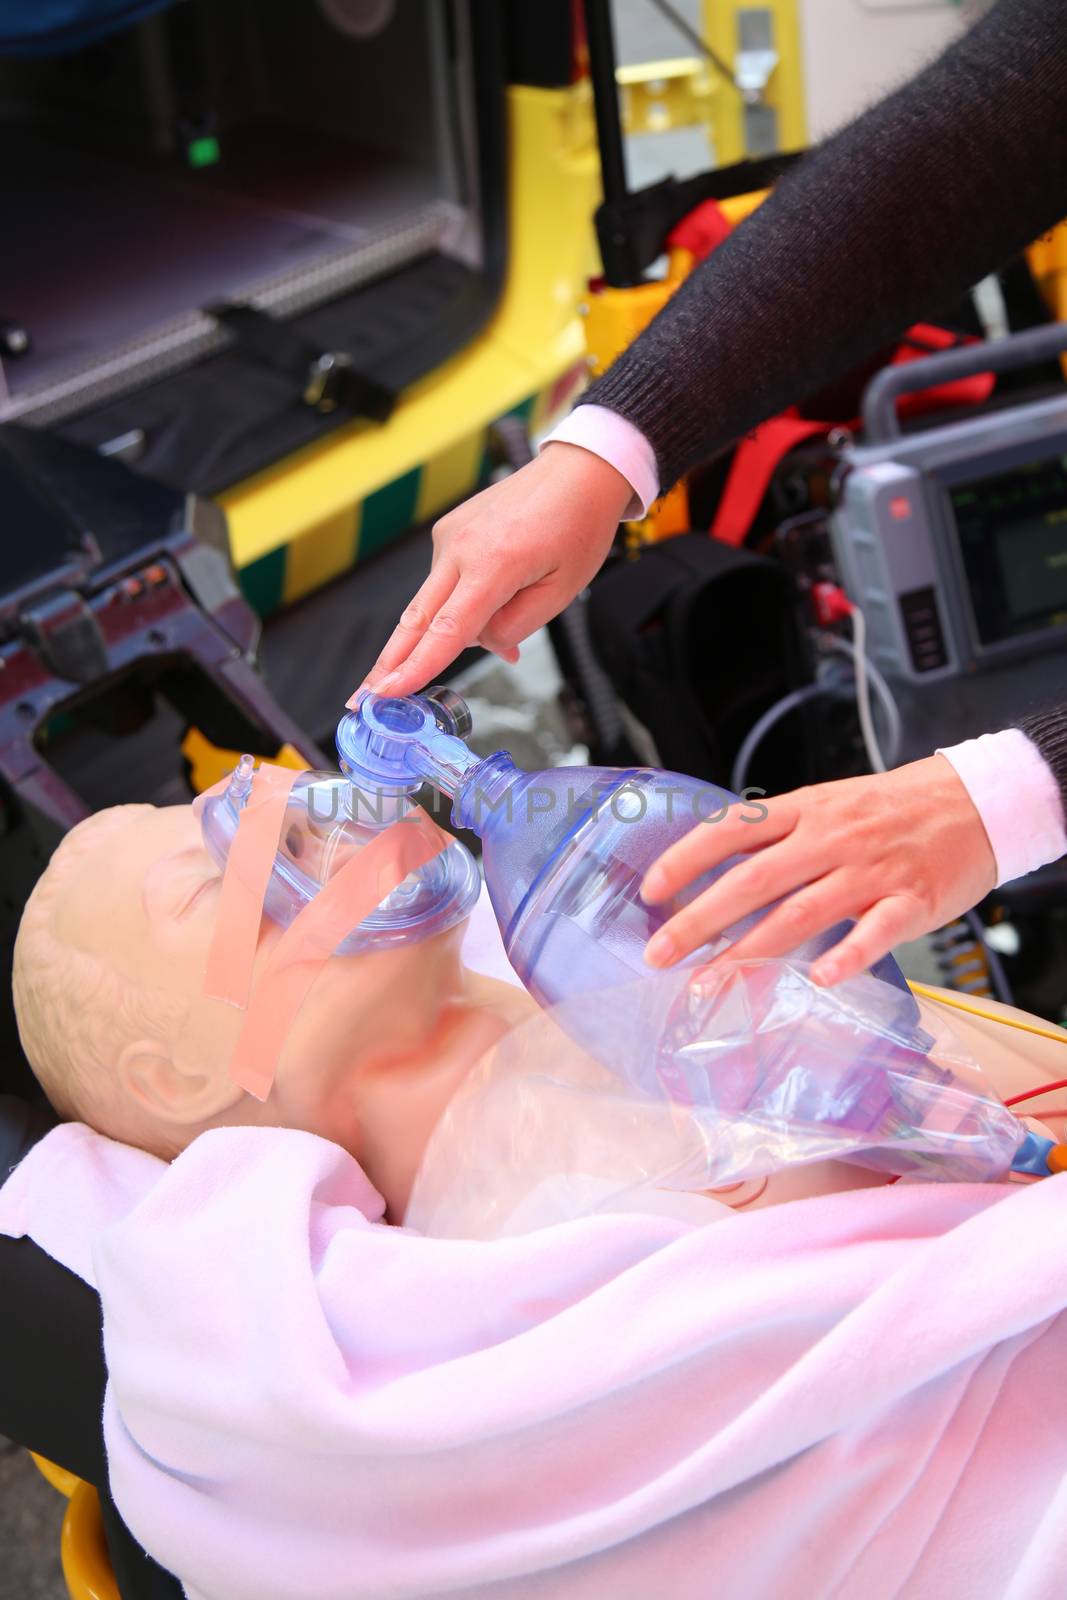 Details of practicing to use an oxygen mask on training doll